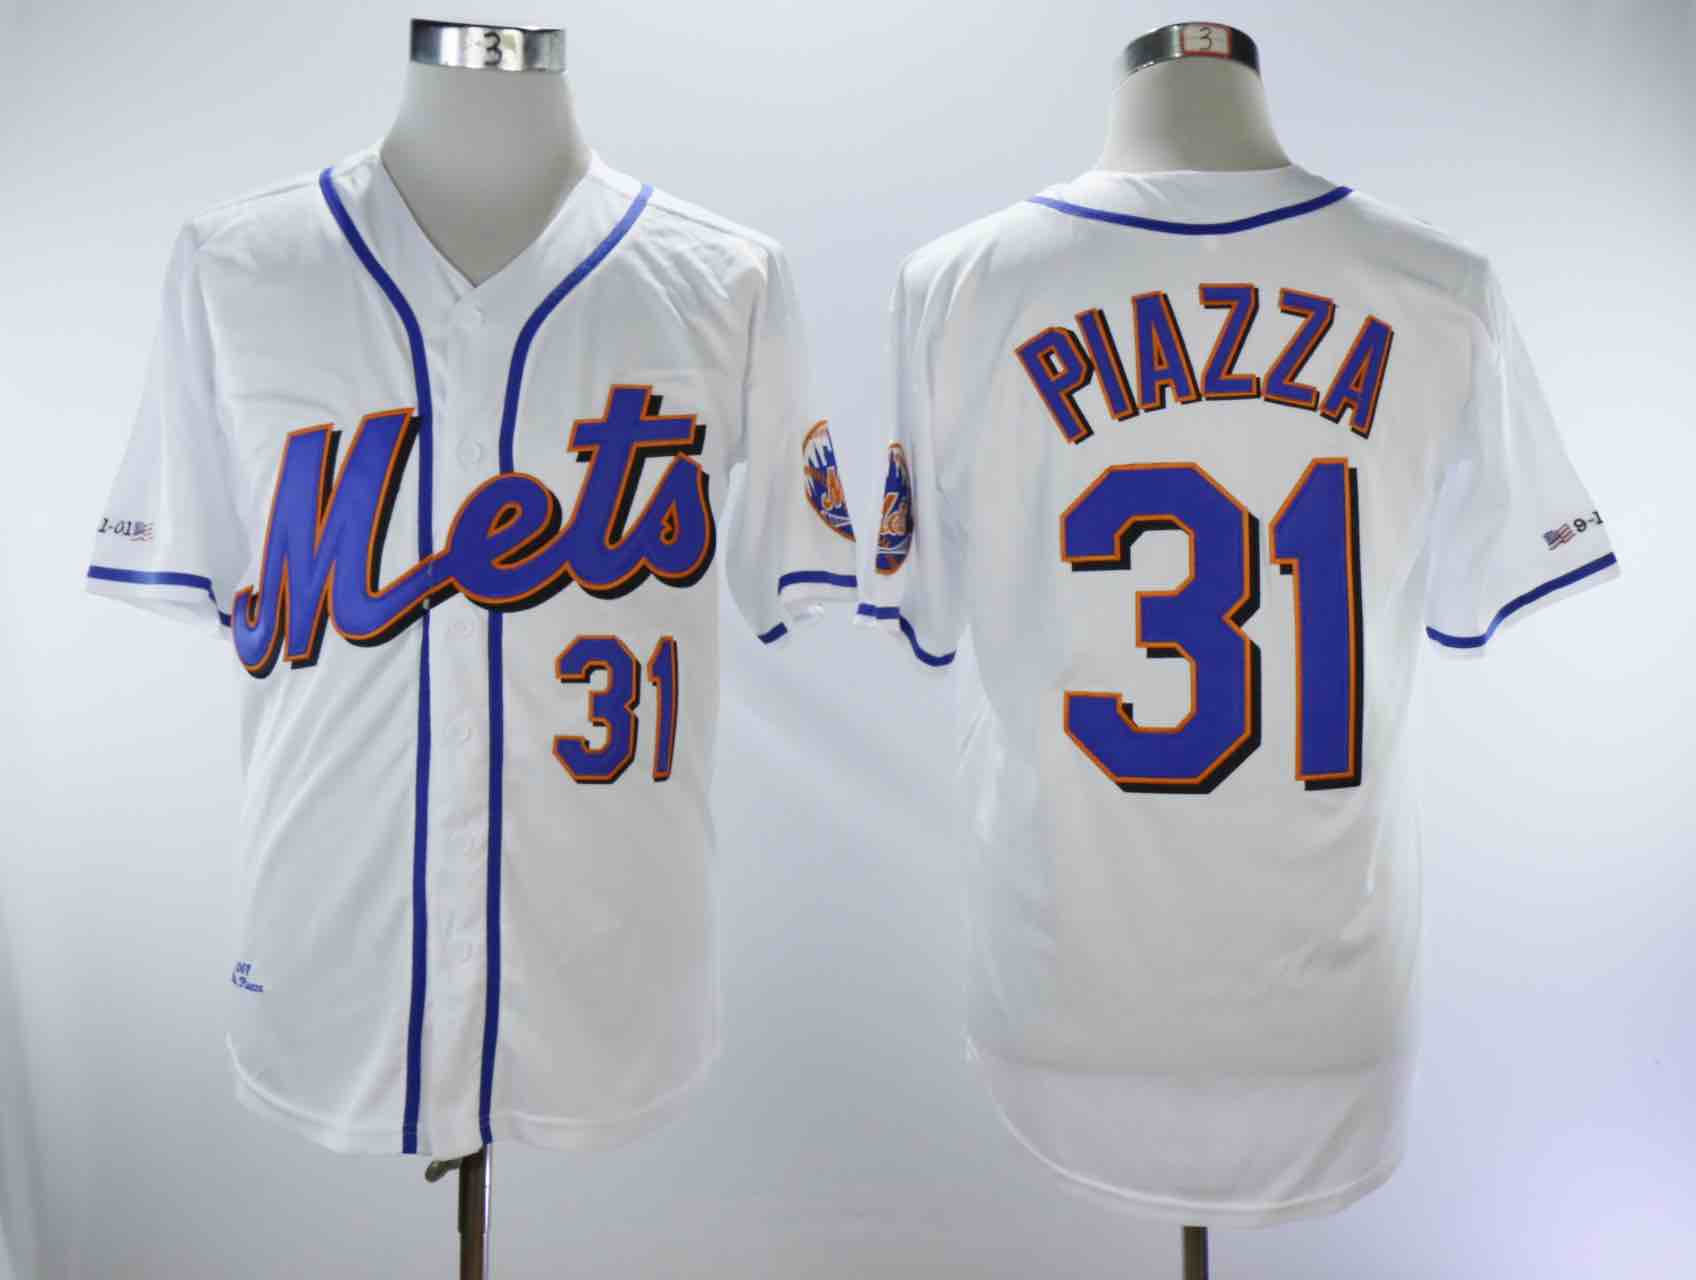 MLB New York Mets #31 Piazza White Throwback Jersey